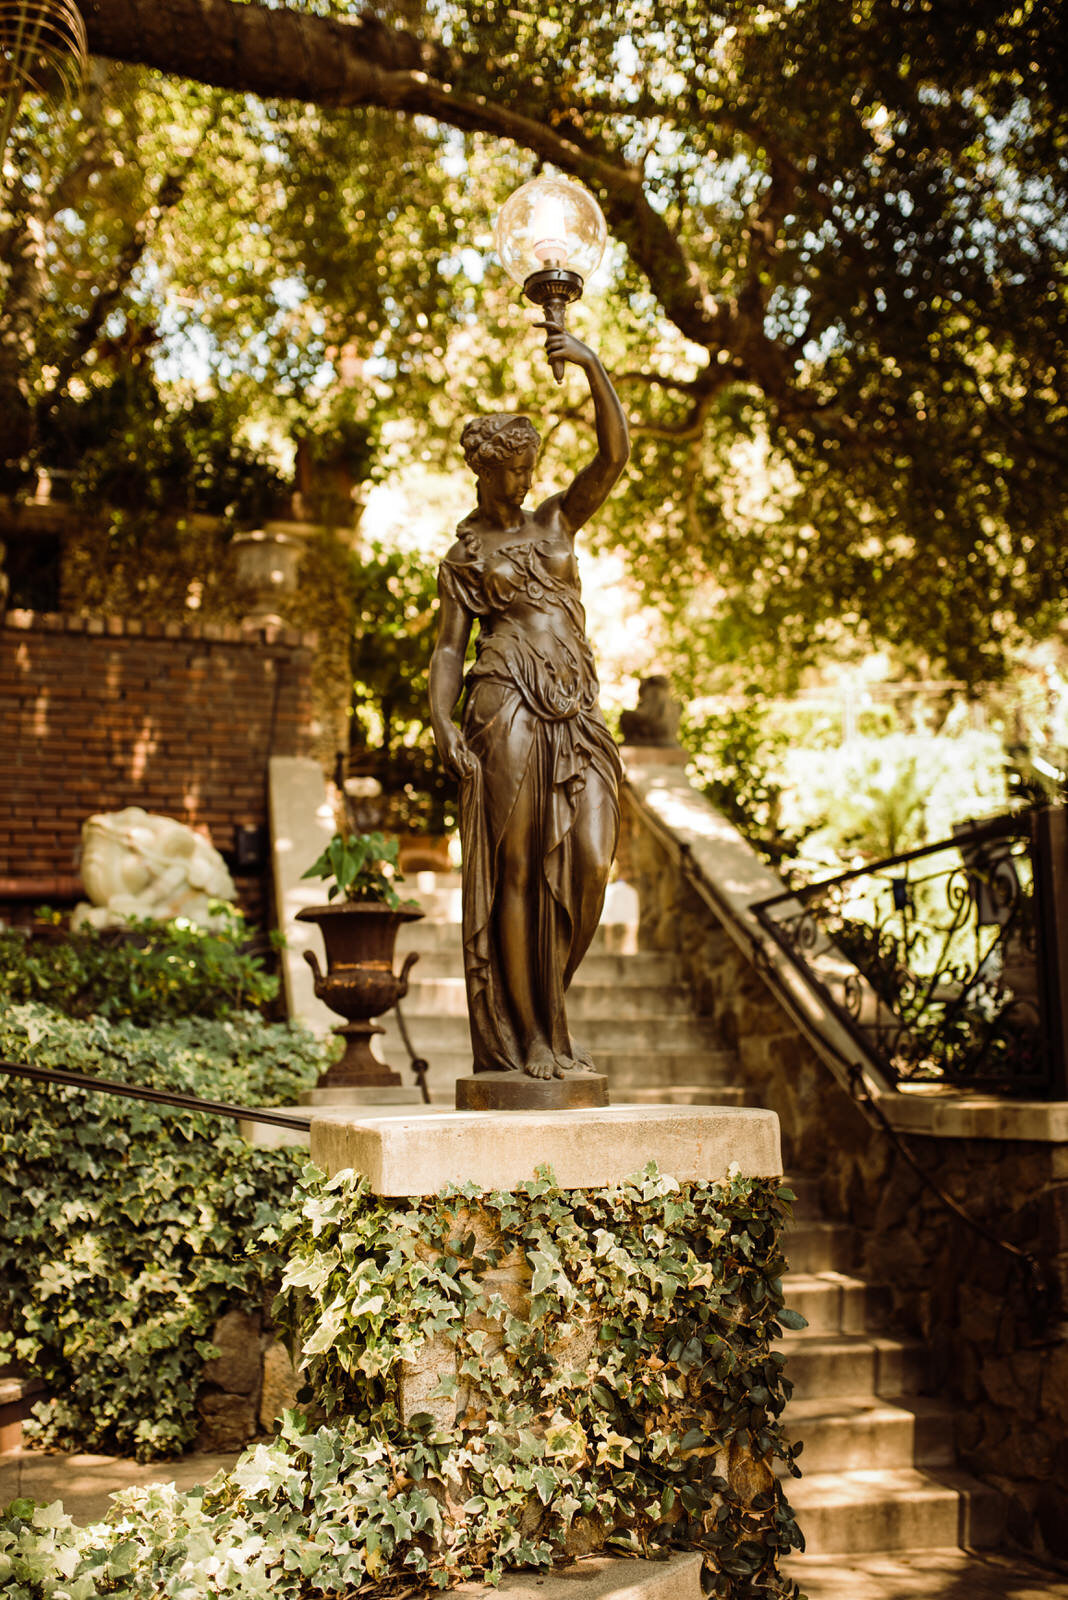 Ivy-Covered Statues at Southern California Garden Wedding Venue - The Houdini Estate | Photos by Kept Record | www.keptrecord.com